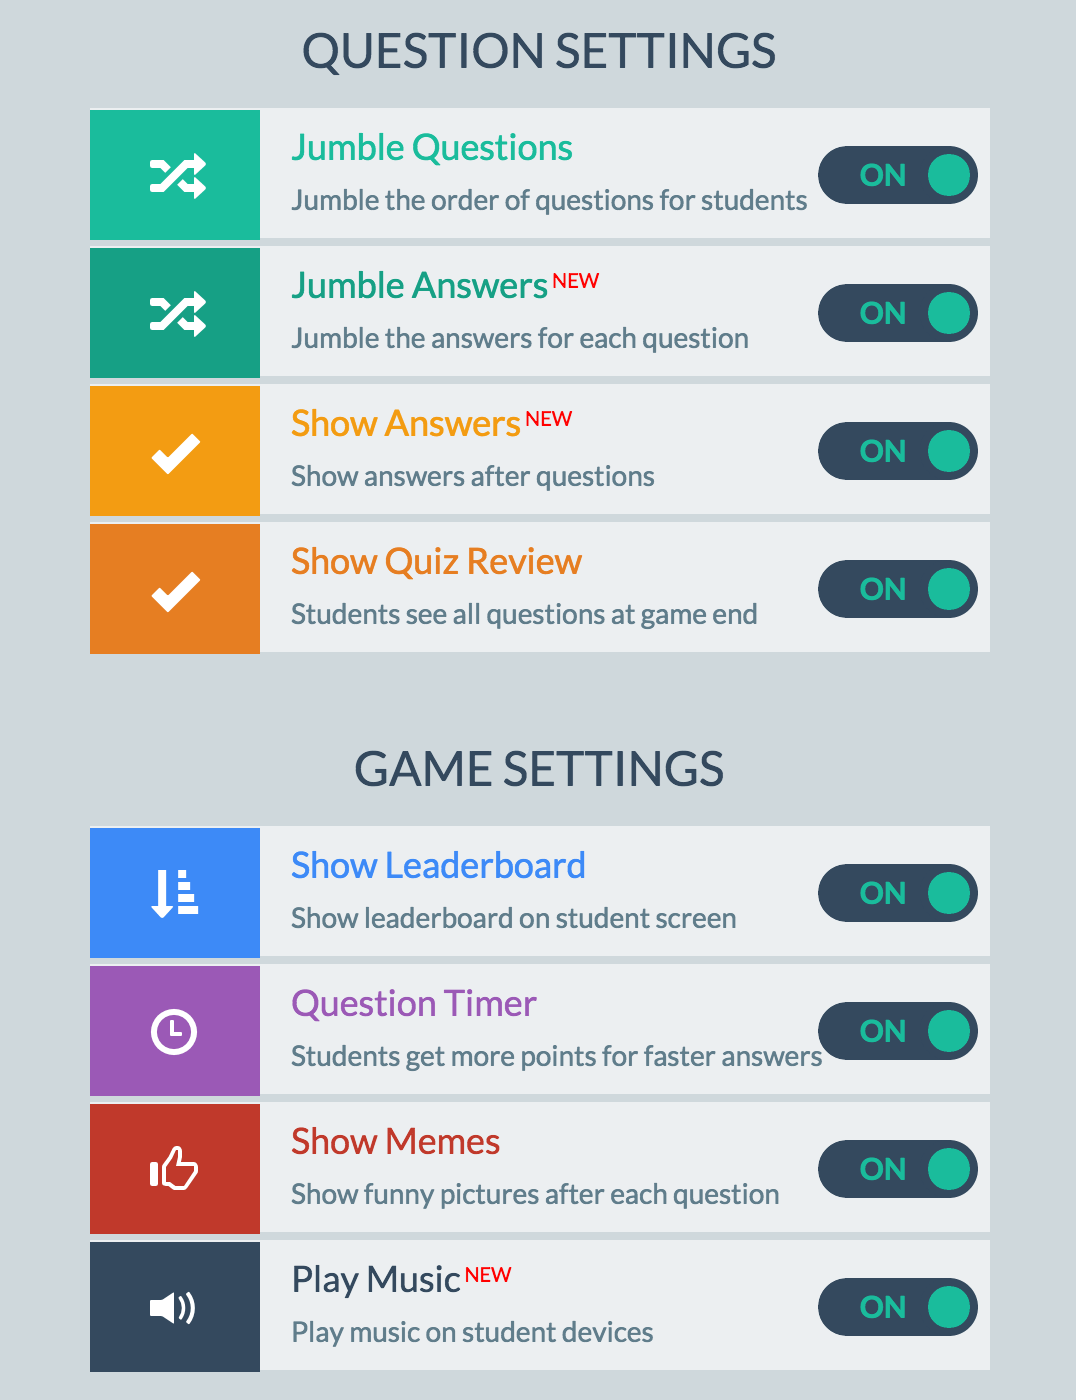 Class Quiz Games with Quizizz (an Alternative to Kahoot) — Learning in Hand  with Tony Vincent